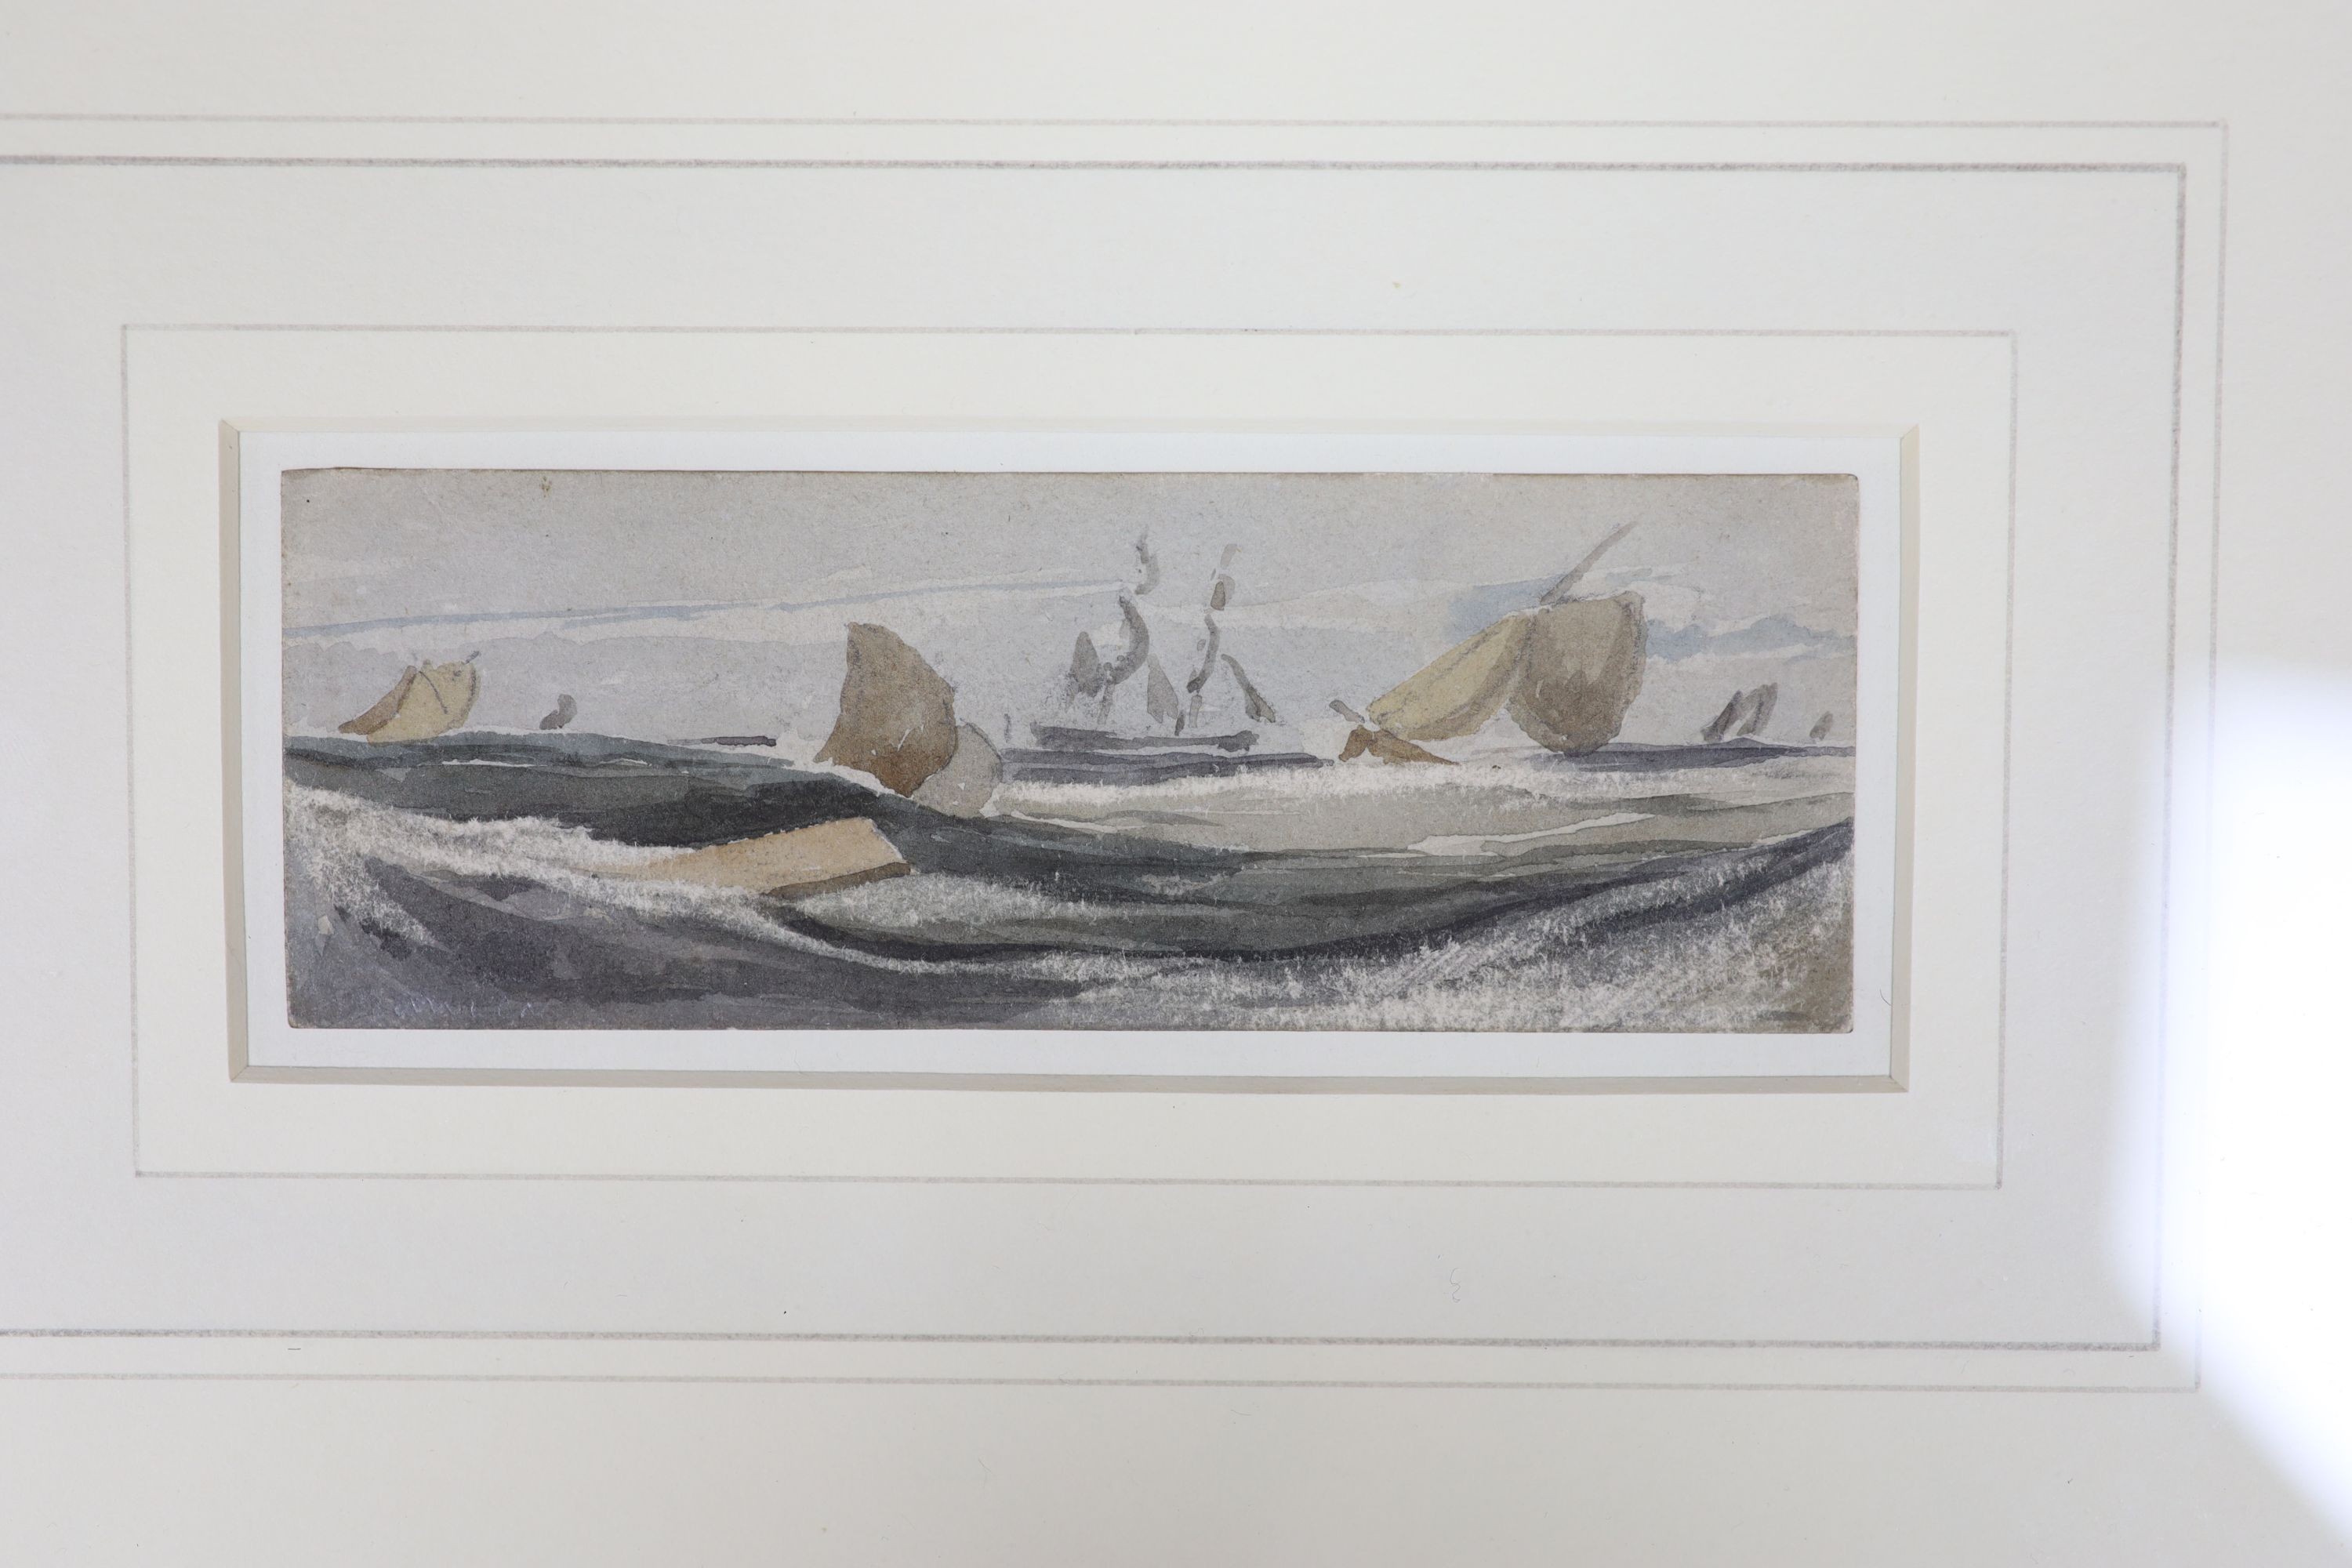 Francois Louis Thomas Francia (1772-1839), watercolour, Shipping beating up the Channel, signed, 4.5 x 13cm.